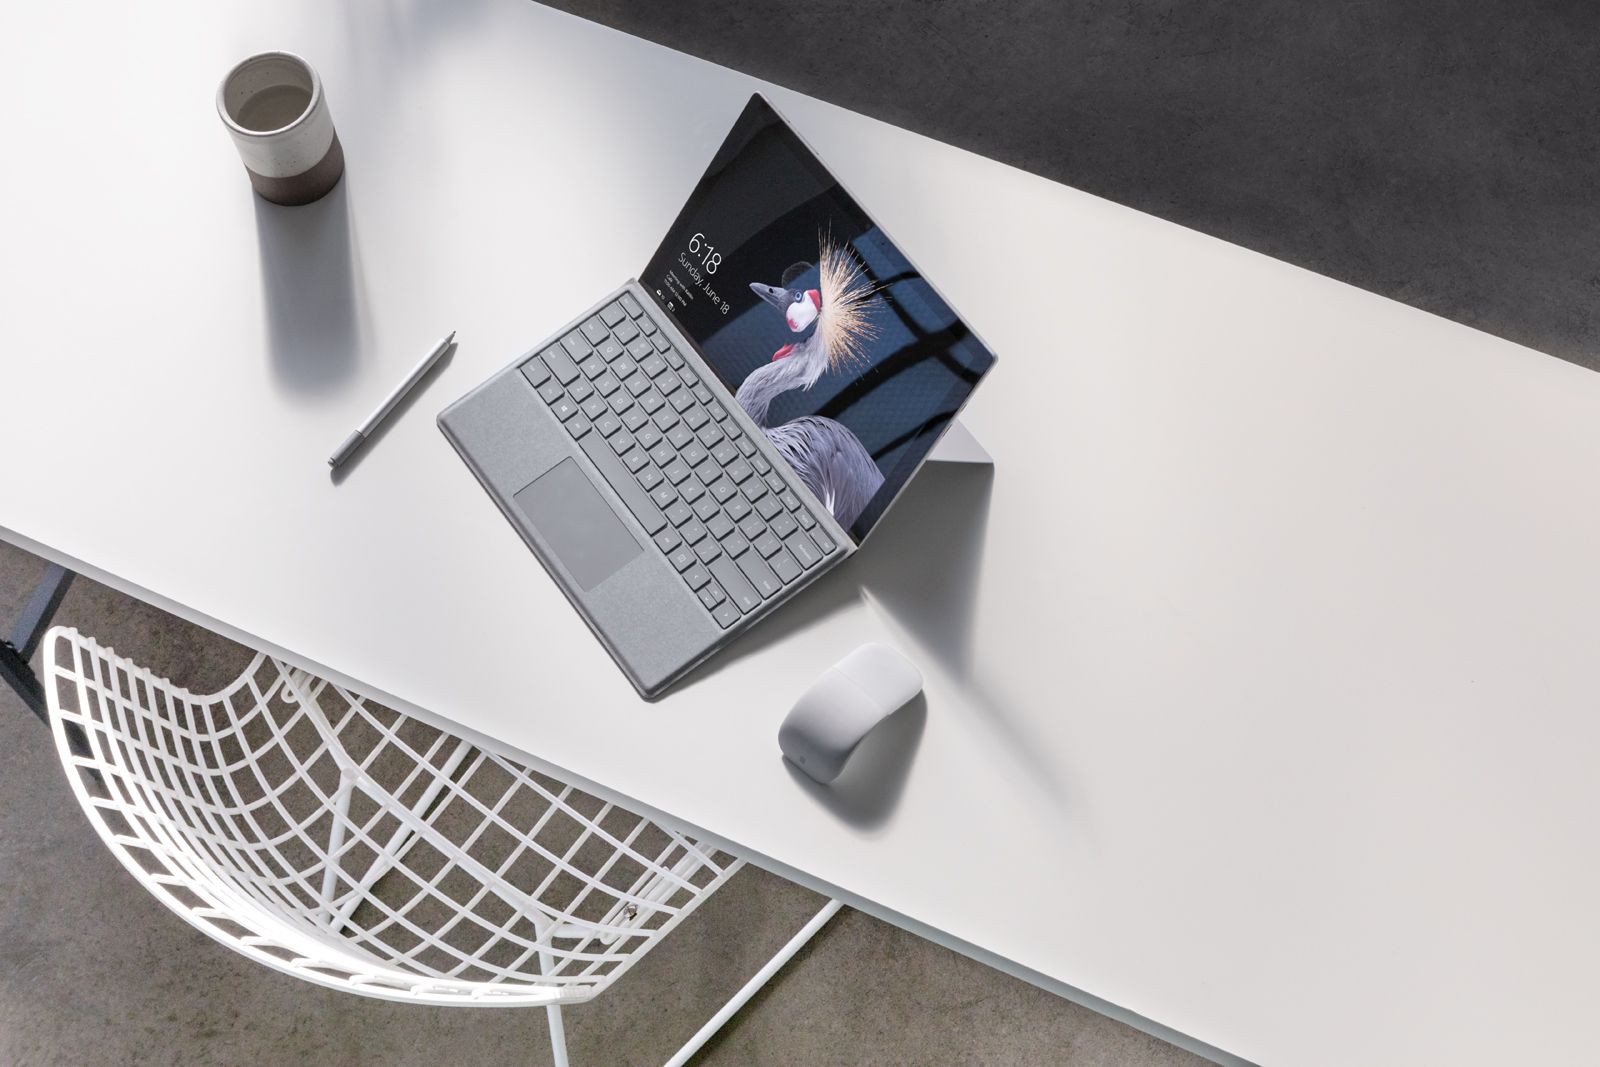 new microsoft surface pro confirmed coming on 15 june from 799 image 1